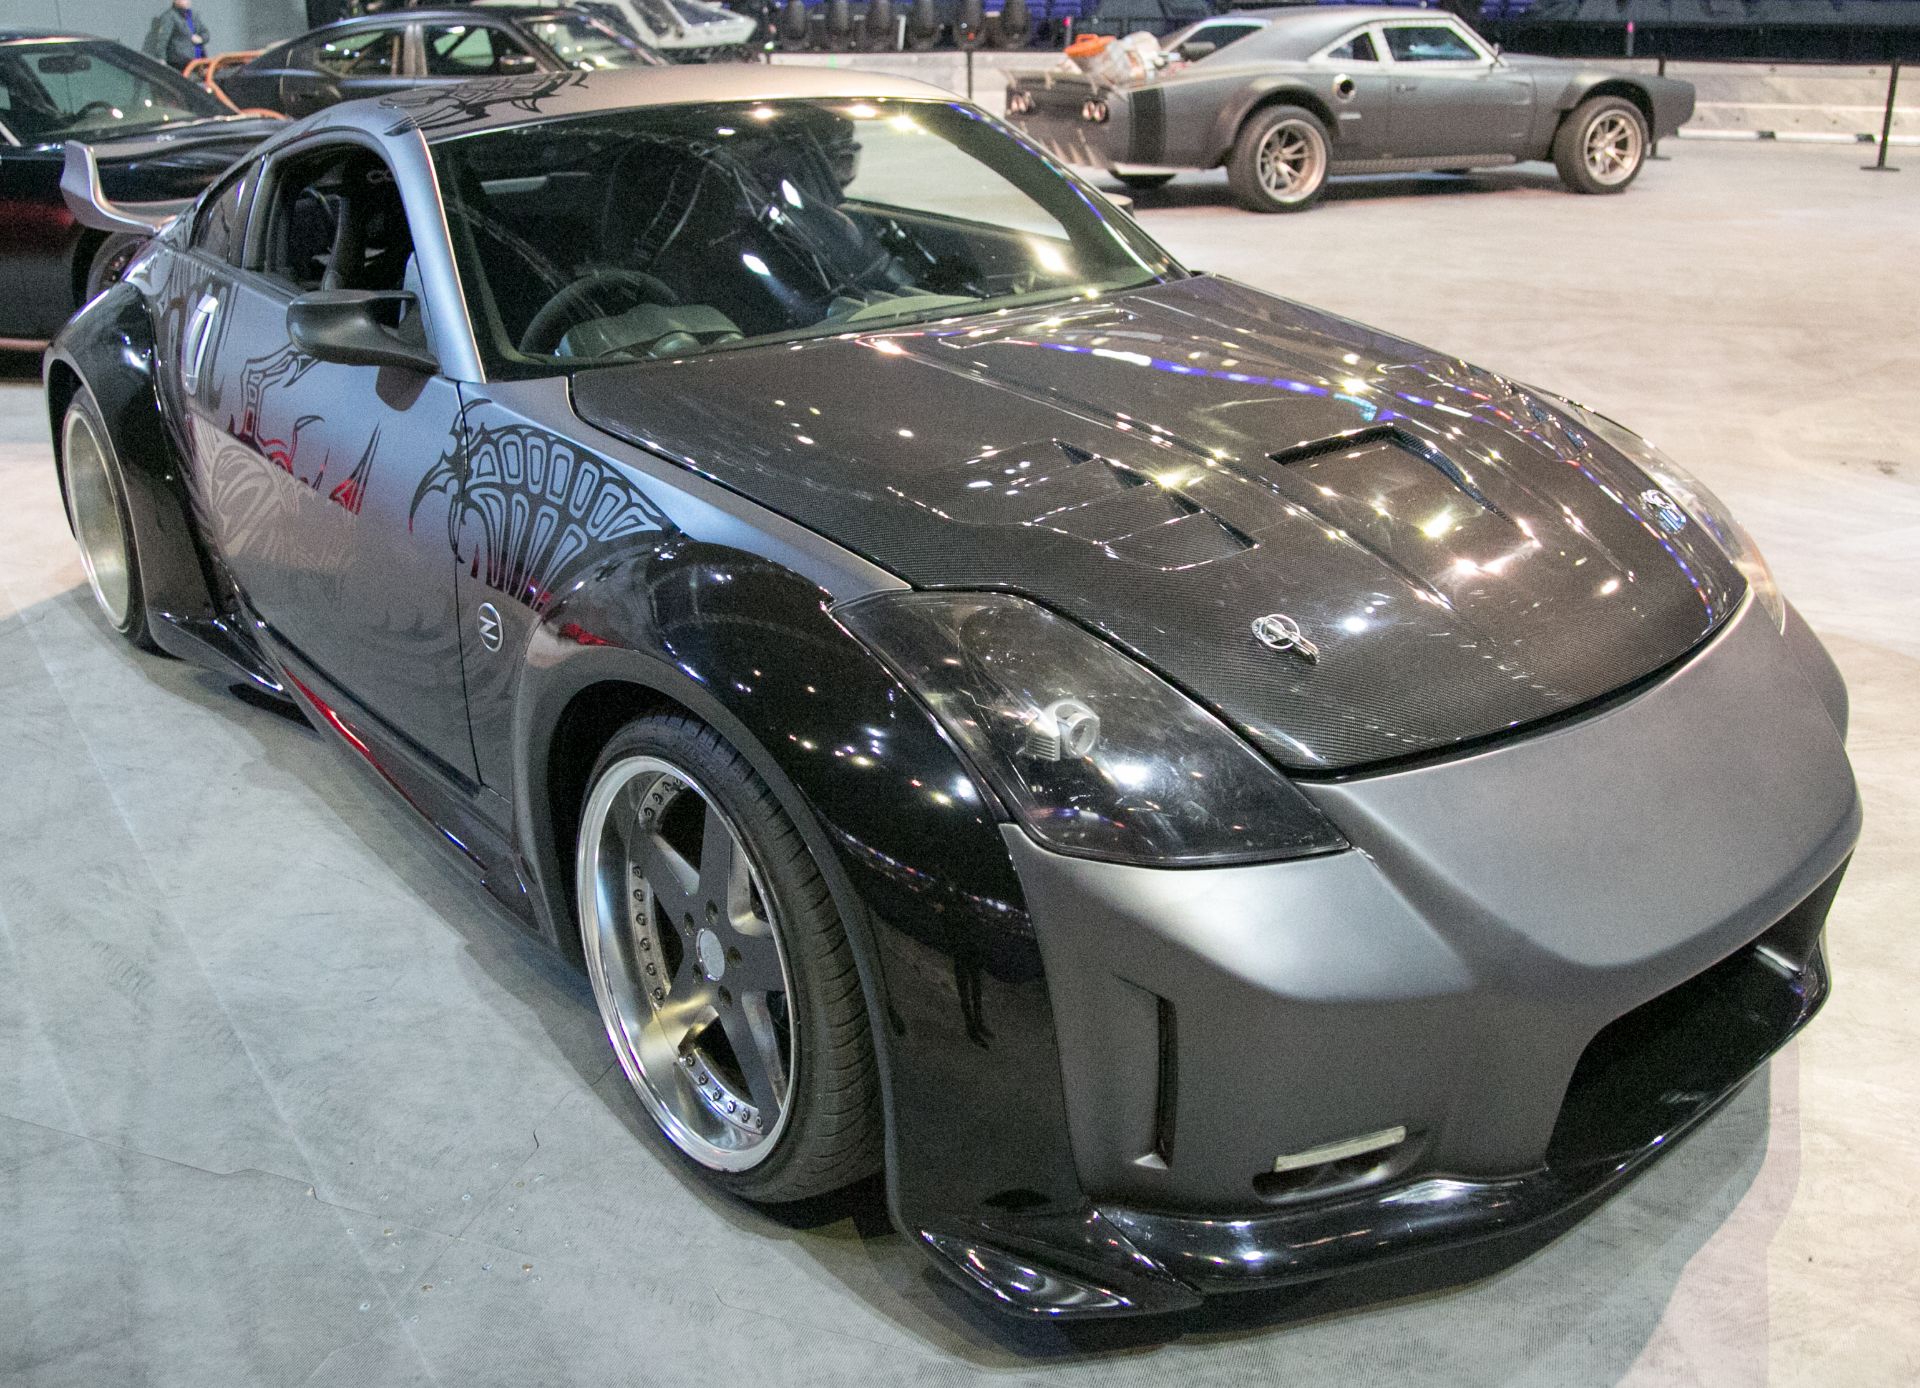 Nissan 350z 2 door Coupe Original Picture Car From “Fast & Furious 3”* ,LS3 V8 6.2 Litre Engine, - Image 3 of 16